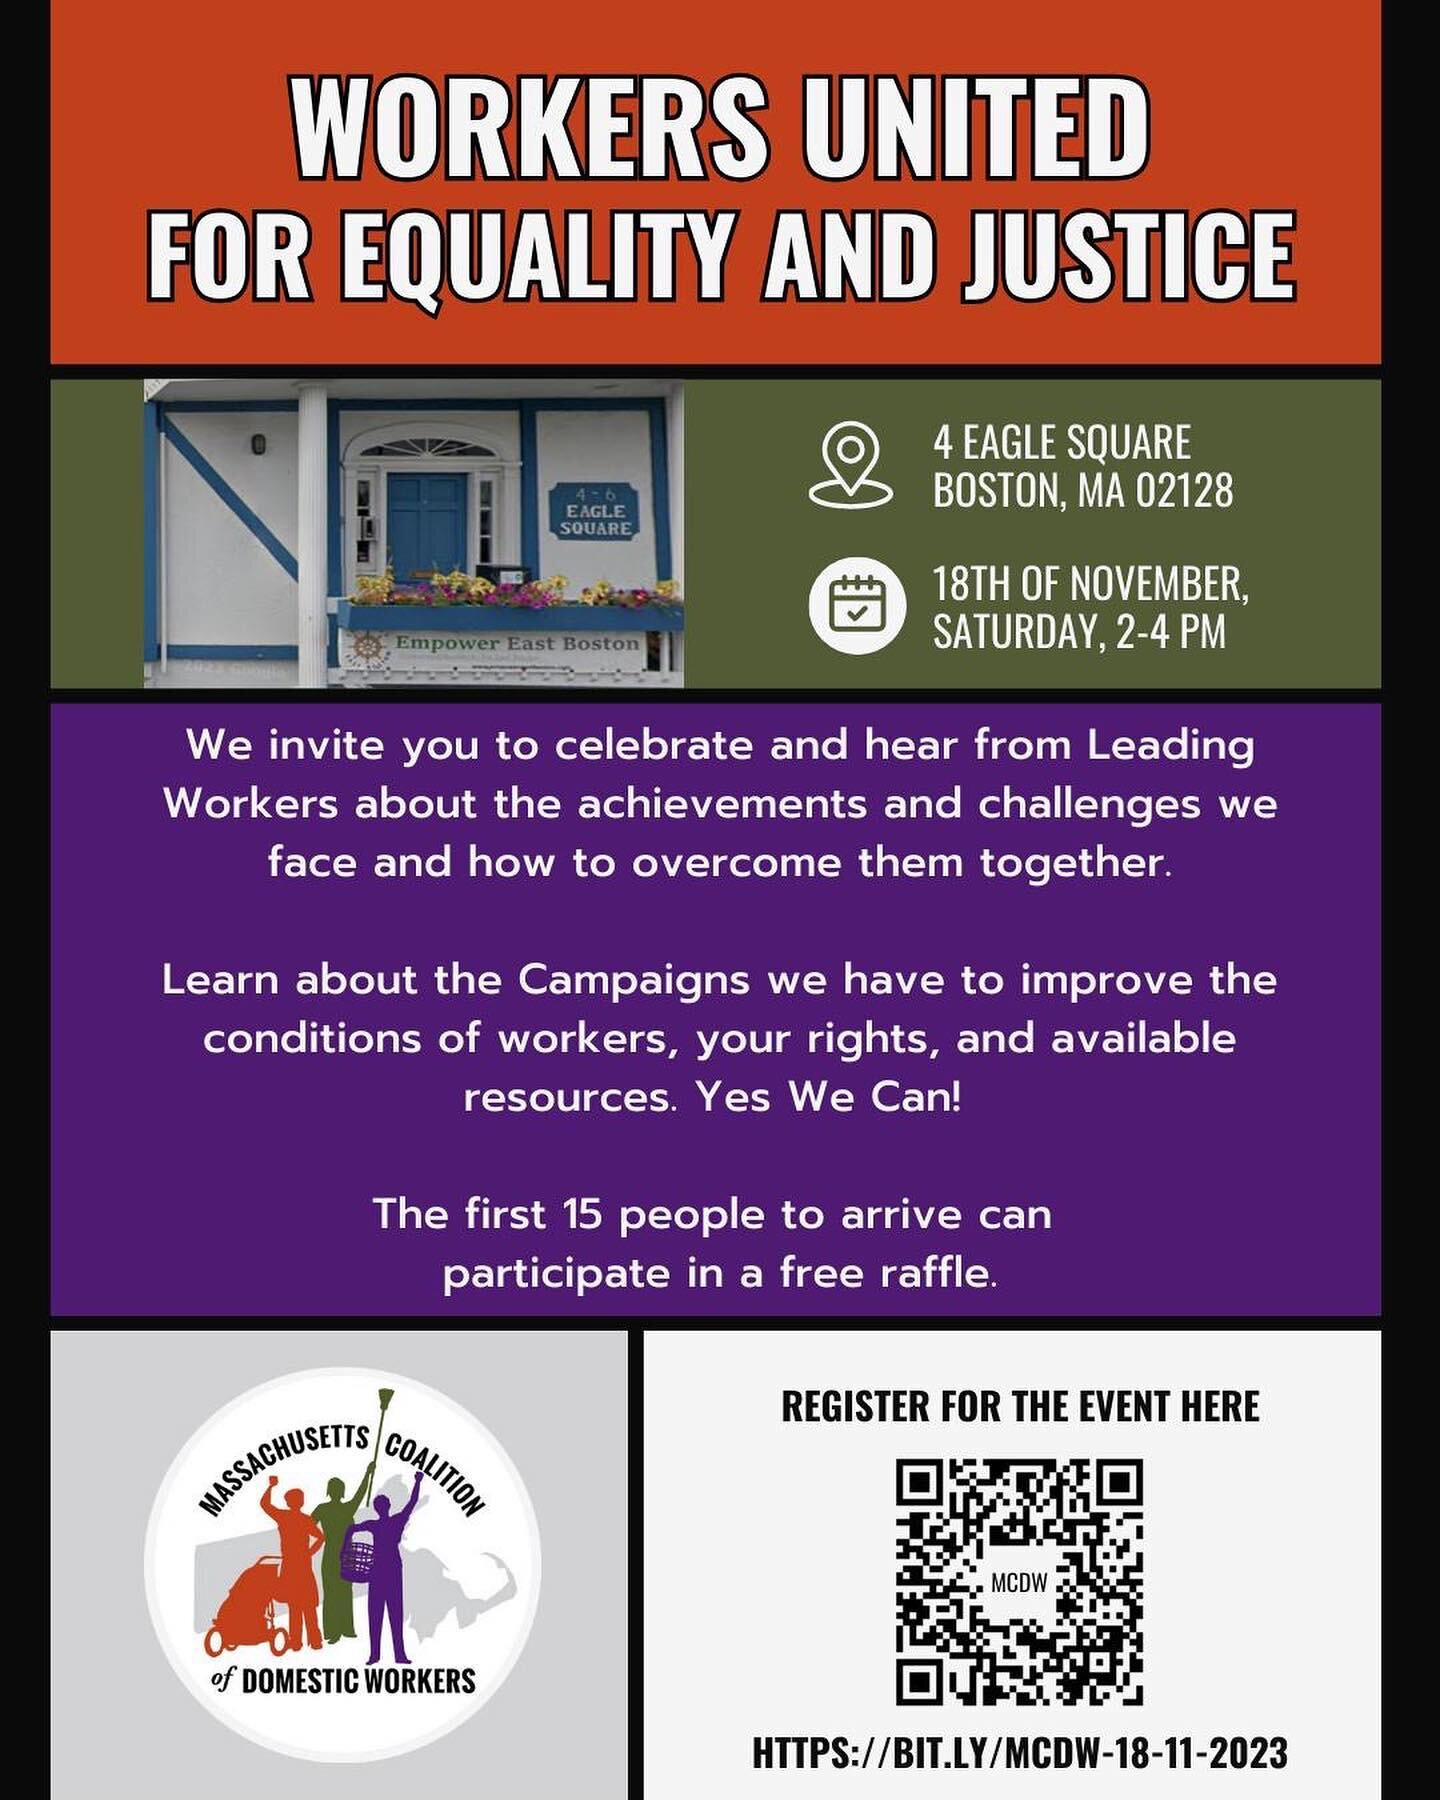 Workers United for Equality and Justice. 

Address: 4 Eagle Square, Boston, MA 02128. 

Date: 18th of November, Saturday, 2-4 PM. 

We invite you to celebrate and hear from Leading Workers about the achievements and challenges we face and how to over